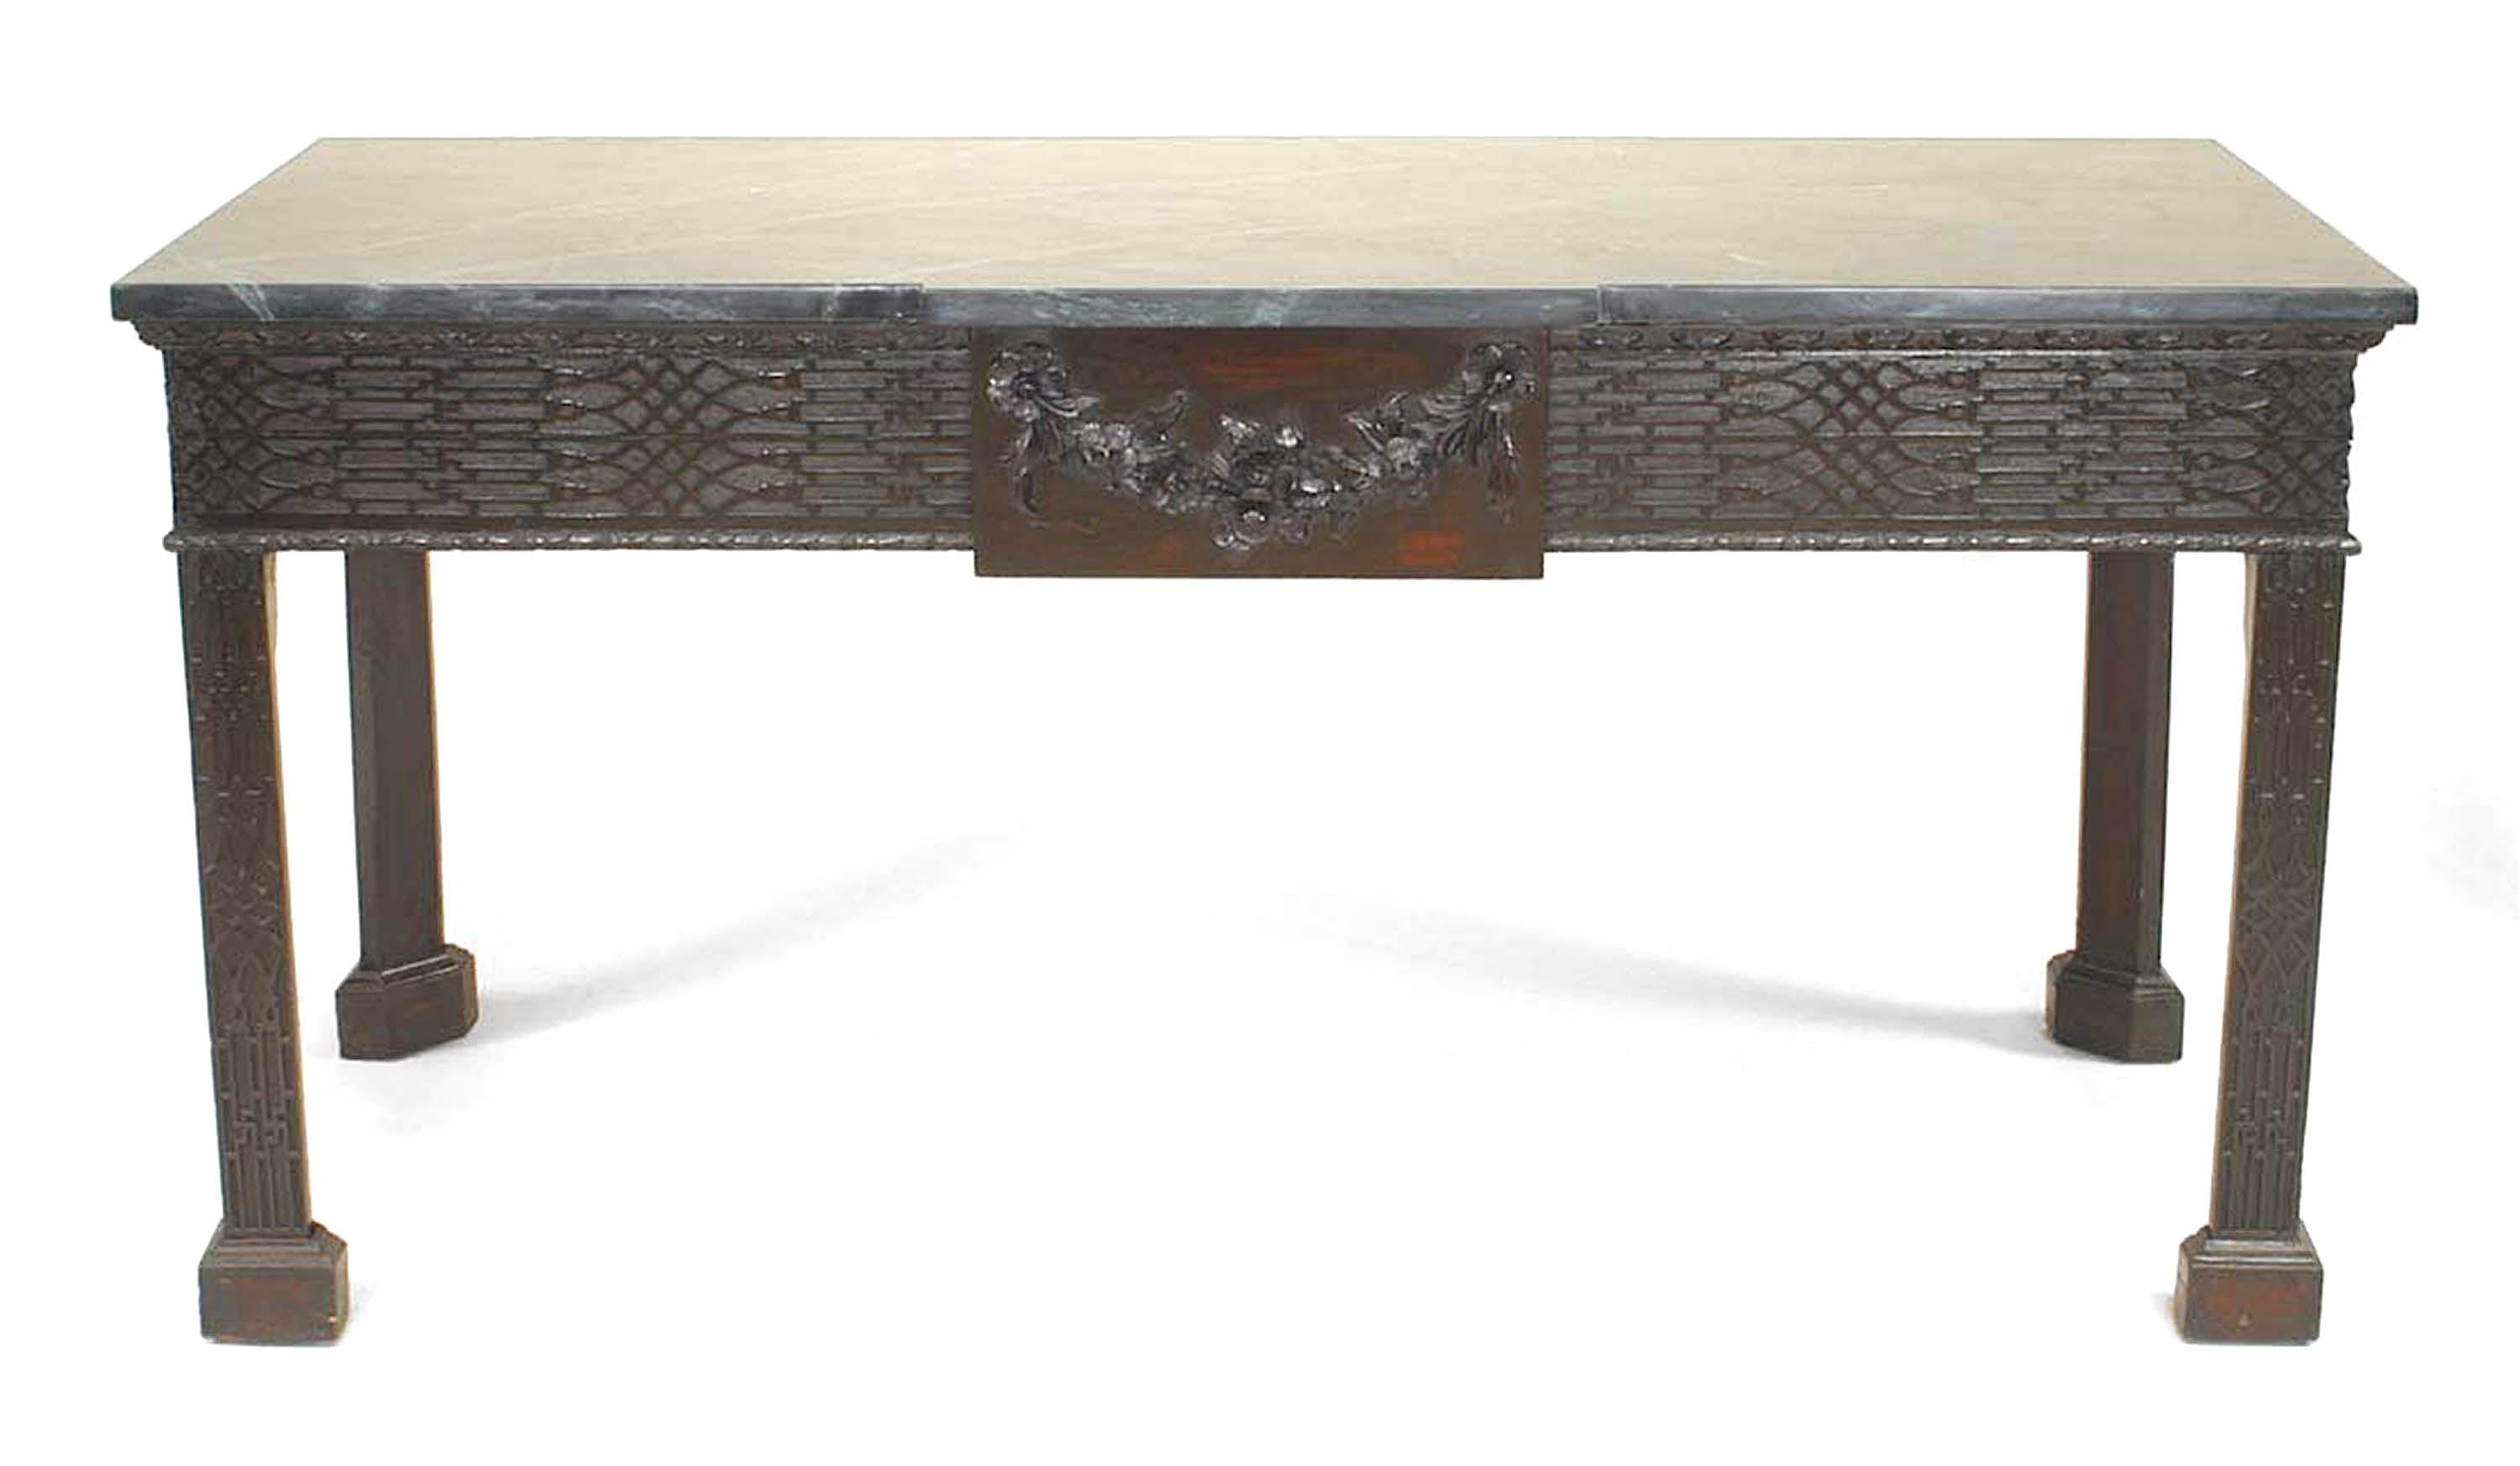 English Chinese Chippendale-style (Late 19th Century) mahogany console table with green marble top and fretwork carved frieze centered with a floral garland tablet.
